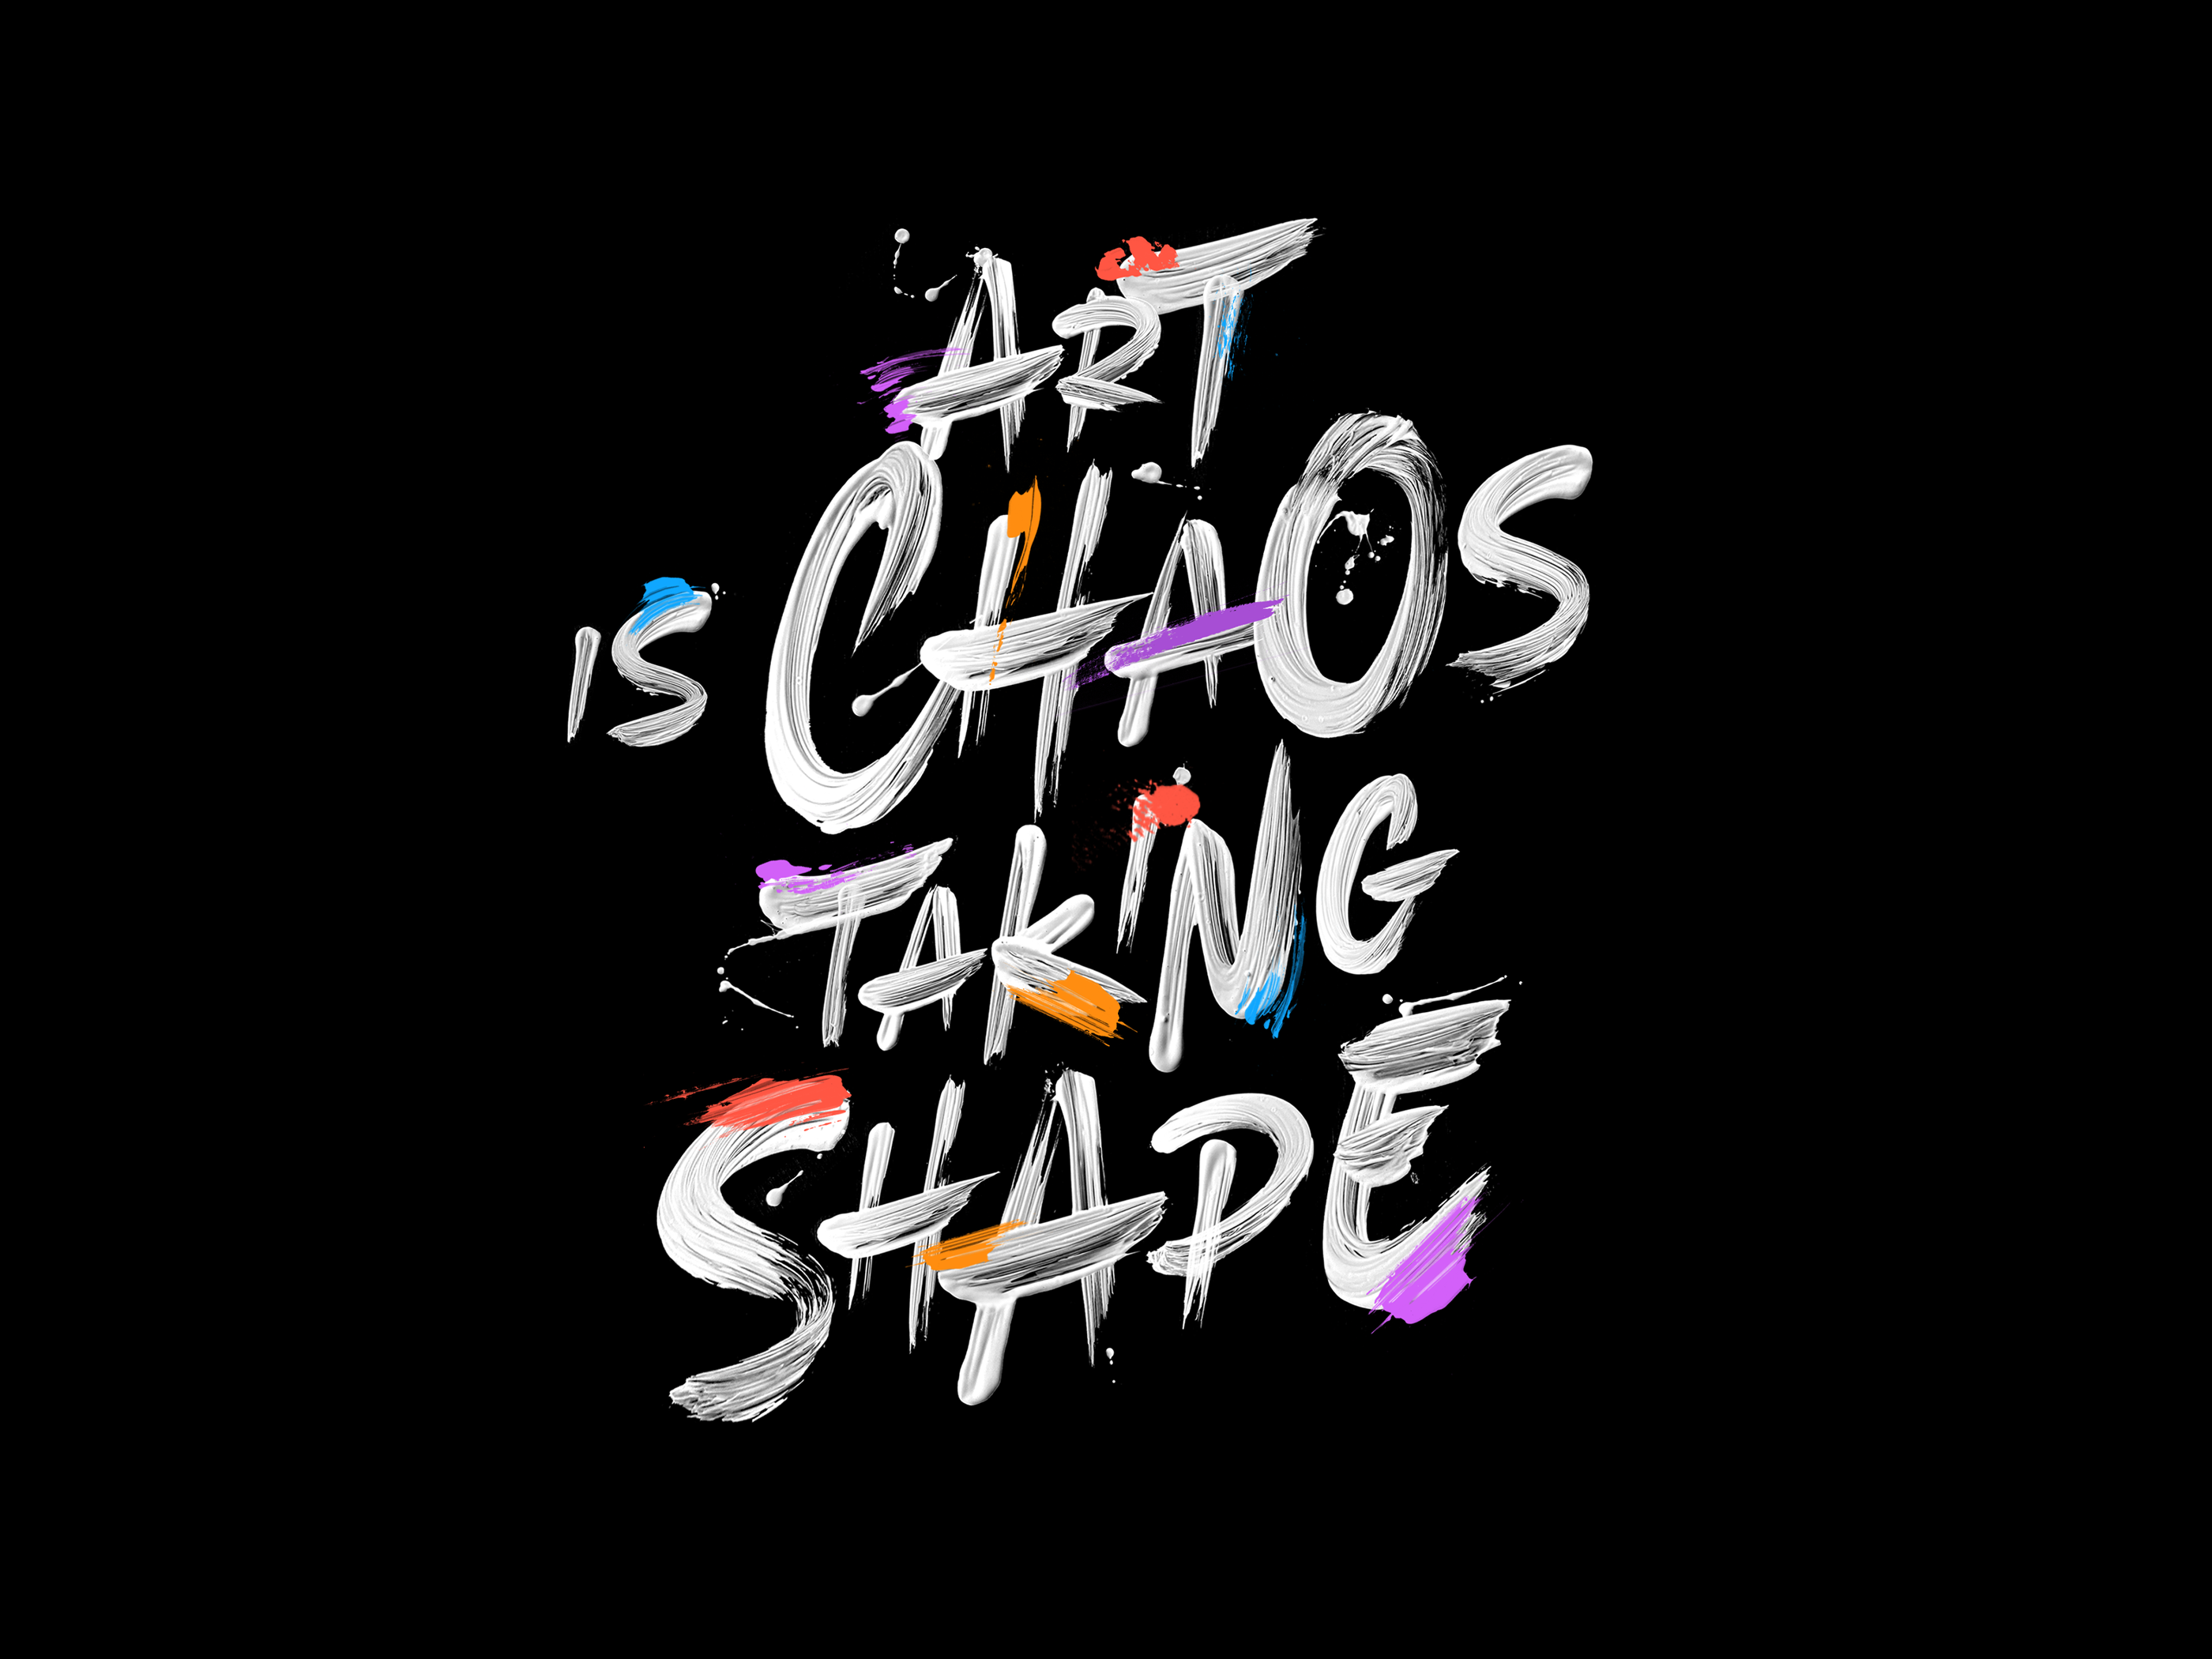 Art is chaos taking shape - Pablo Picasso by Laura Dillema on Dribbble